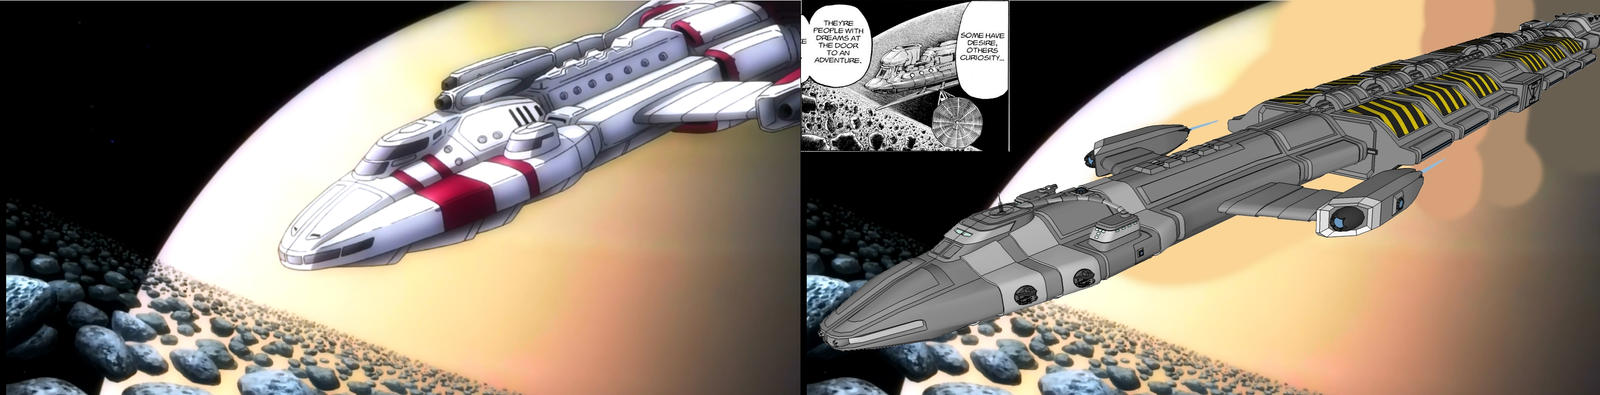 My Hydra Freighter vs ship in Space Brothers anime